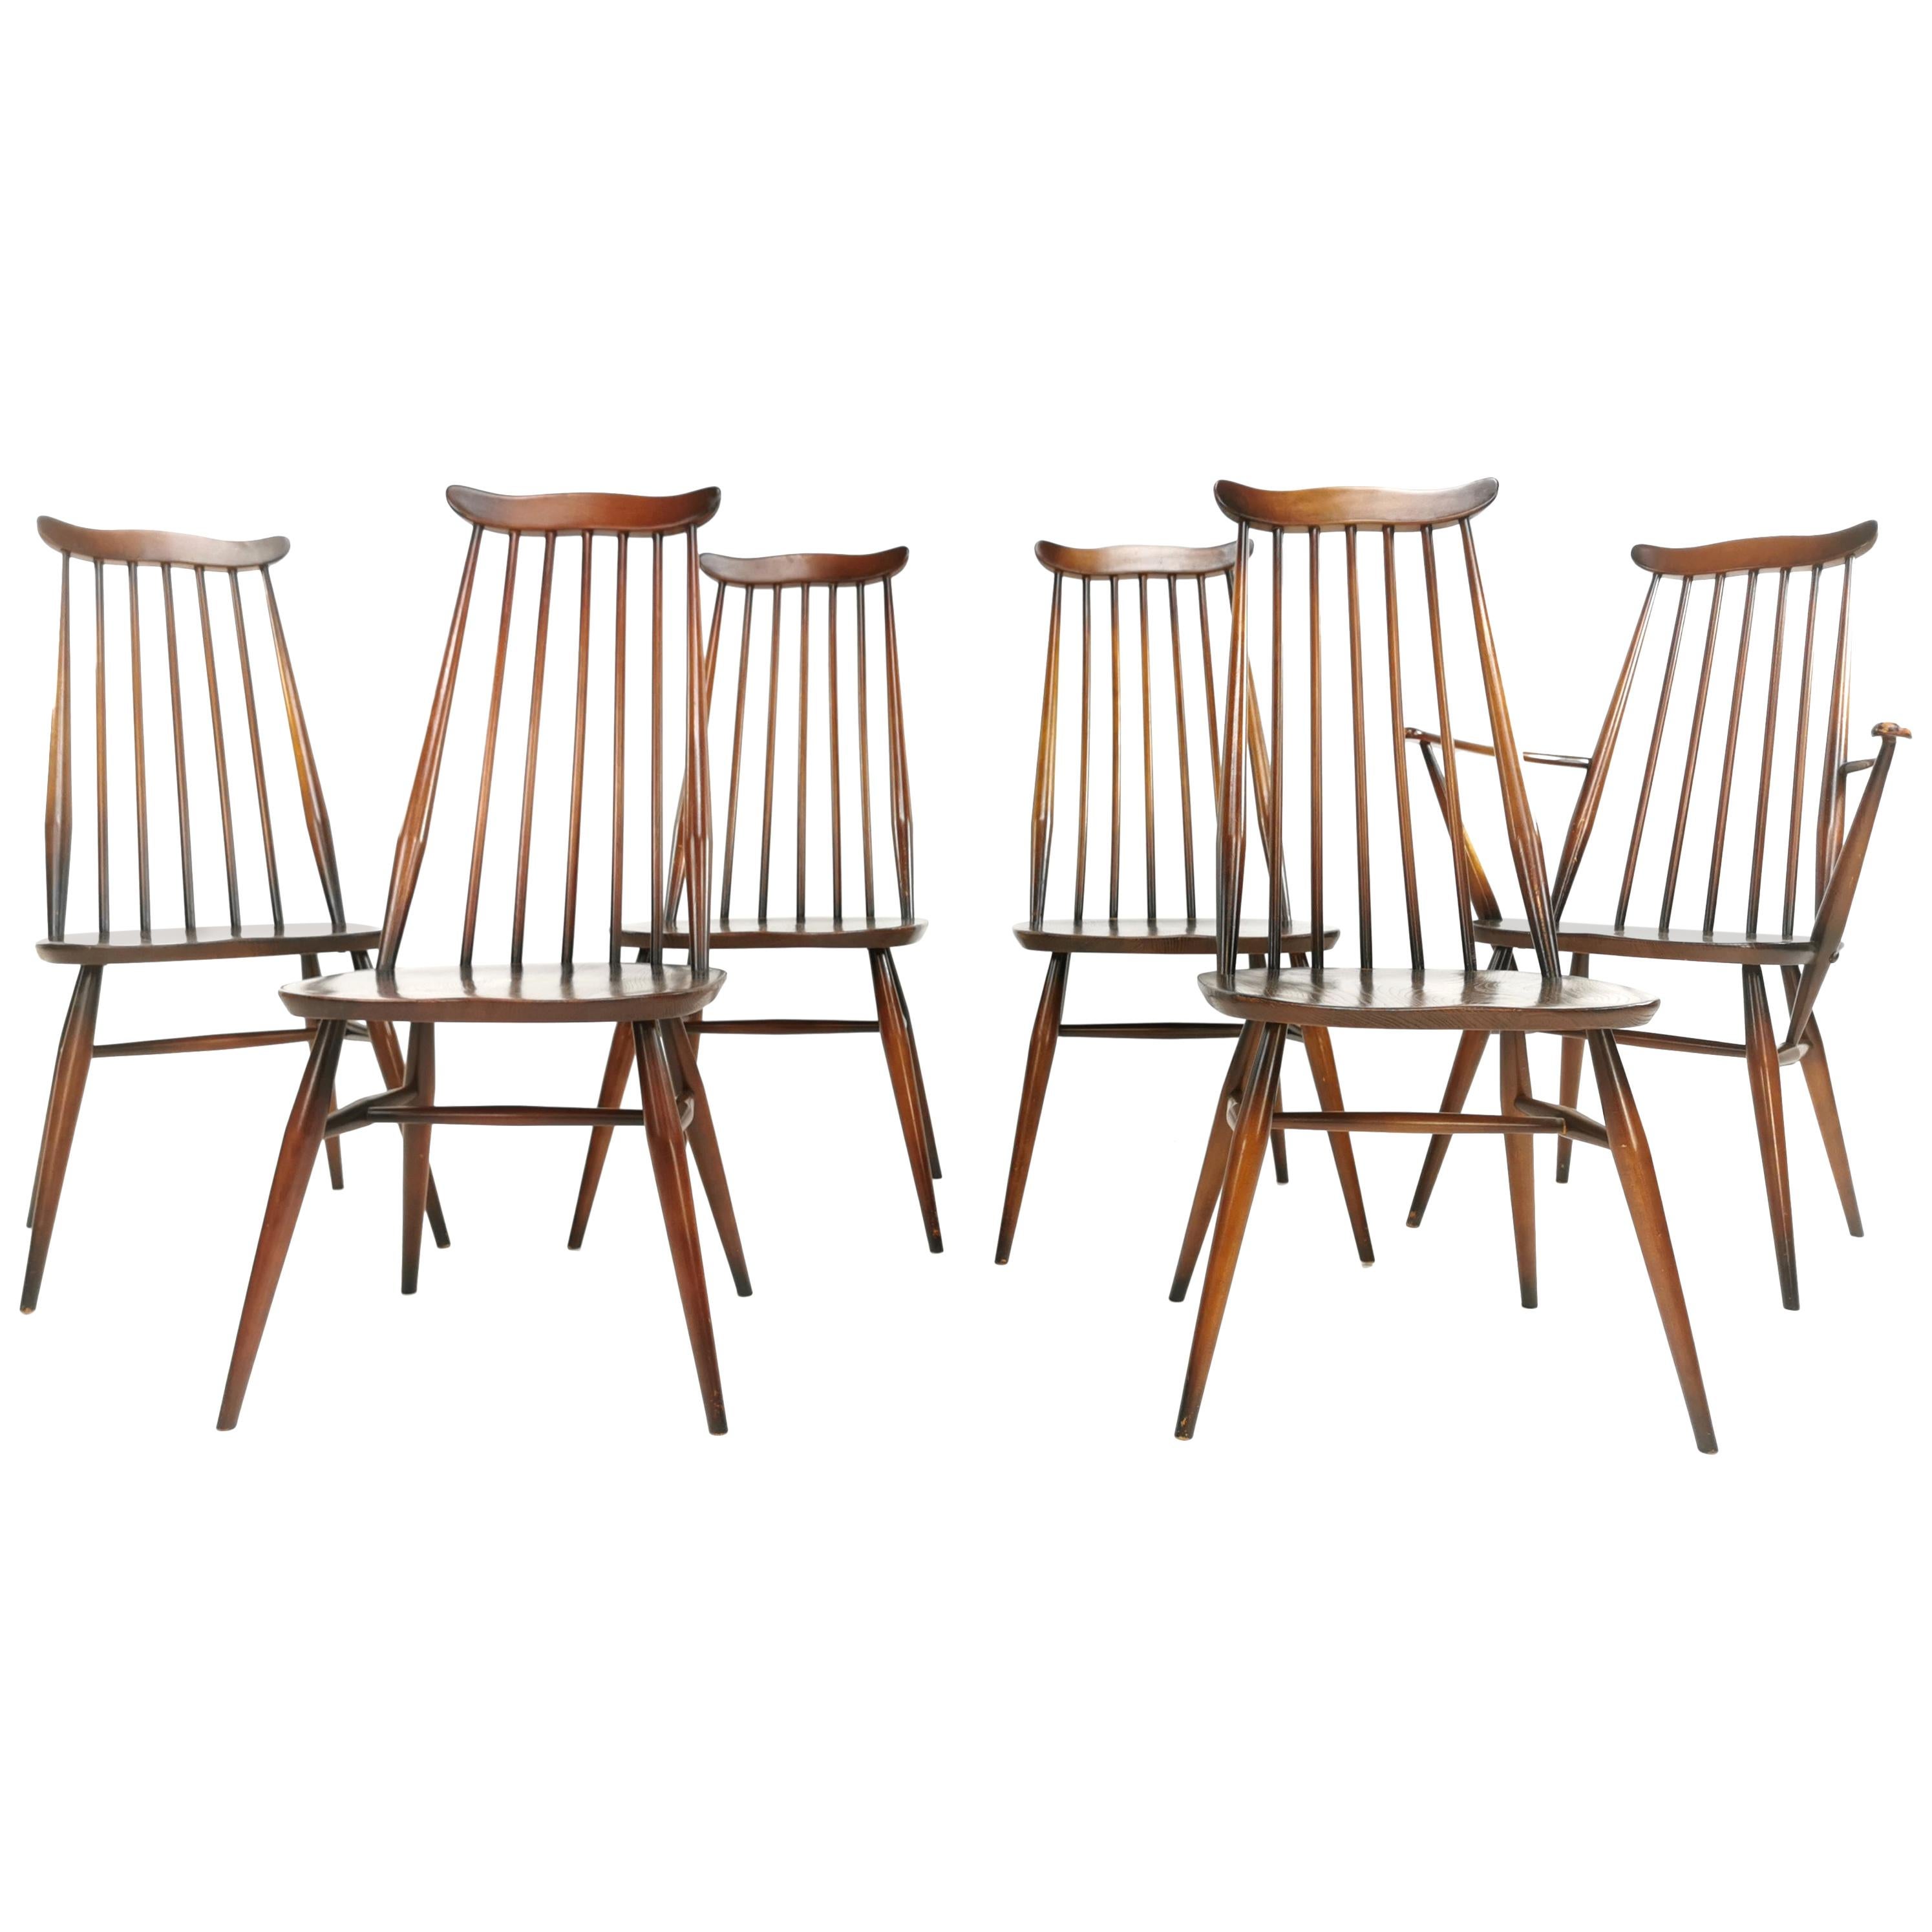 Set of 6 Vintage Ercol Elm and Beech Goldsmith Dining Chairs Midcentury